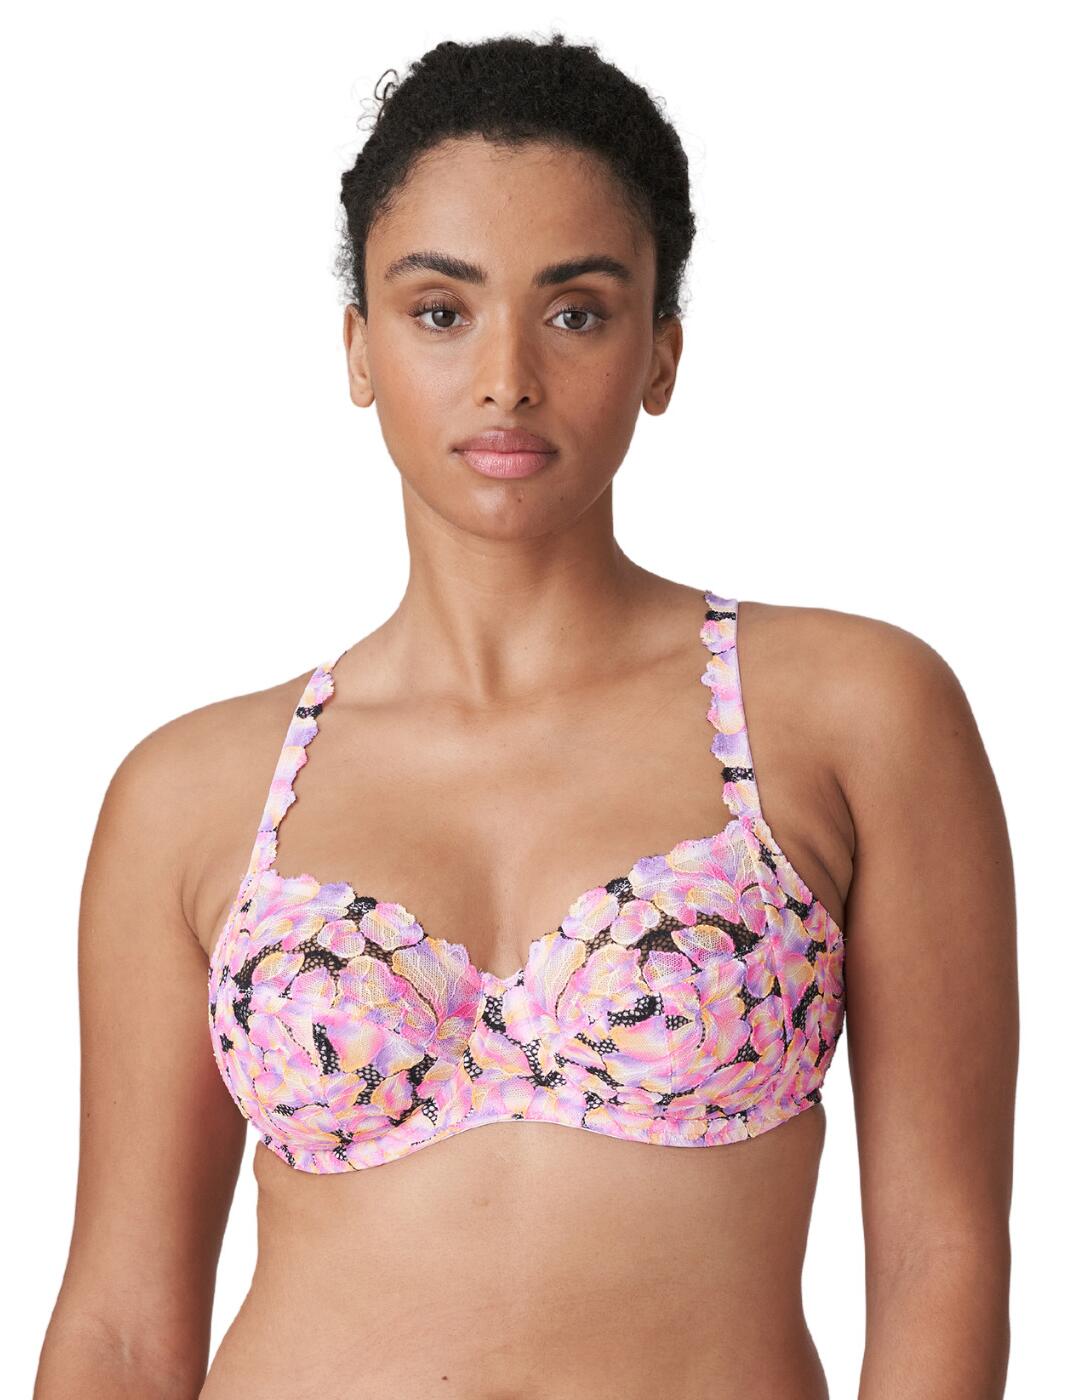 36E Bra Size in E Cup Sizes Navy Convertible, Four Section Cup and